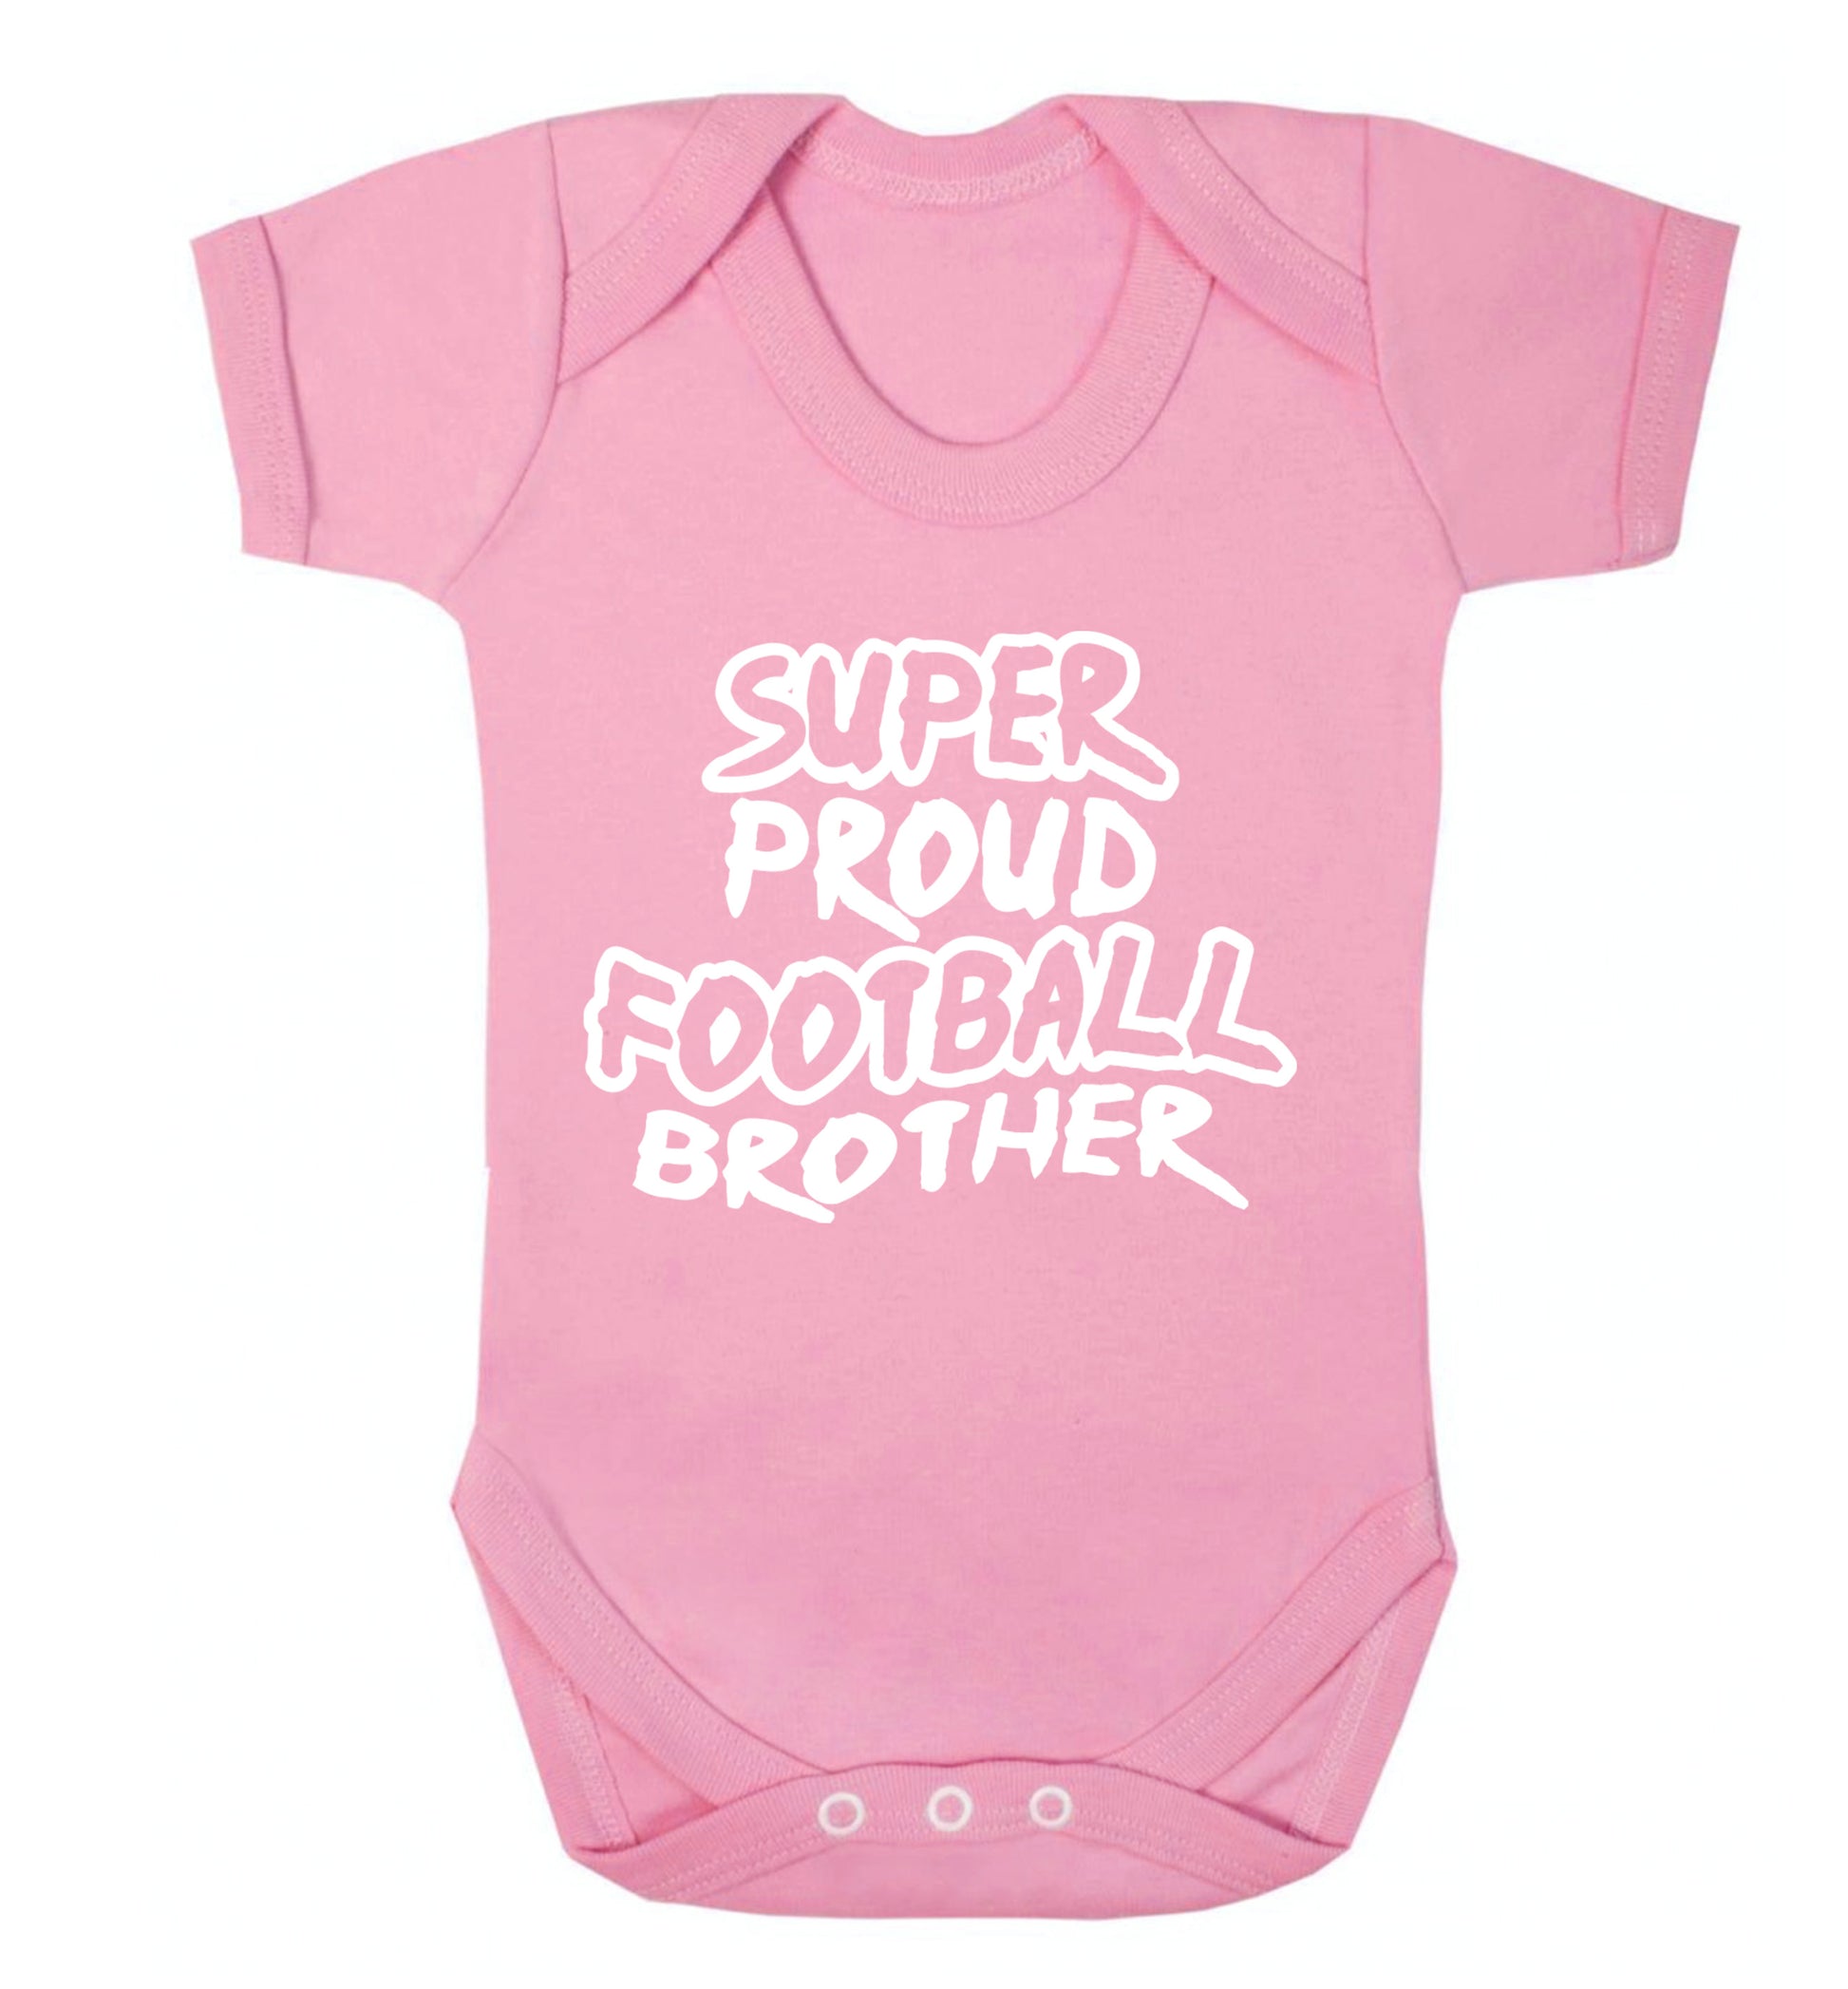 Super proud football brother Baby Vest pale pink 18-24 months